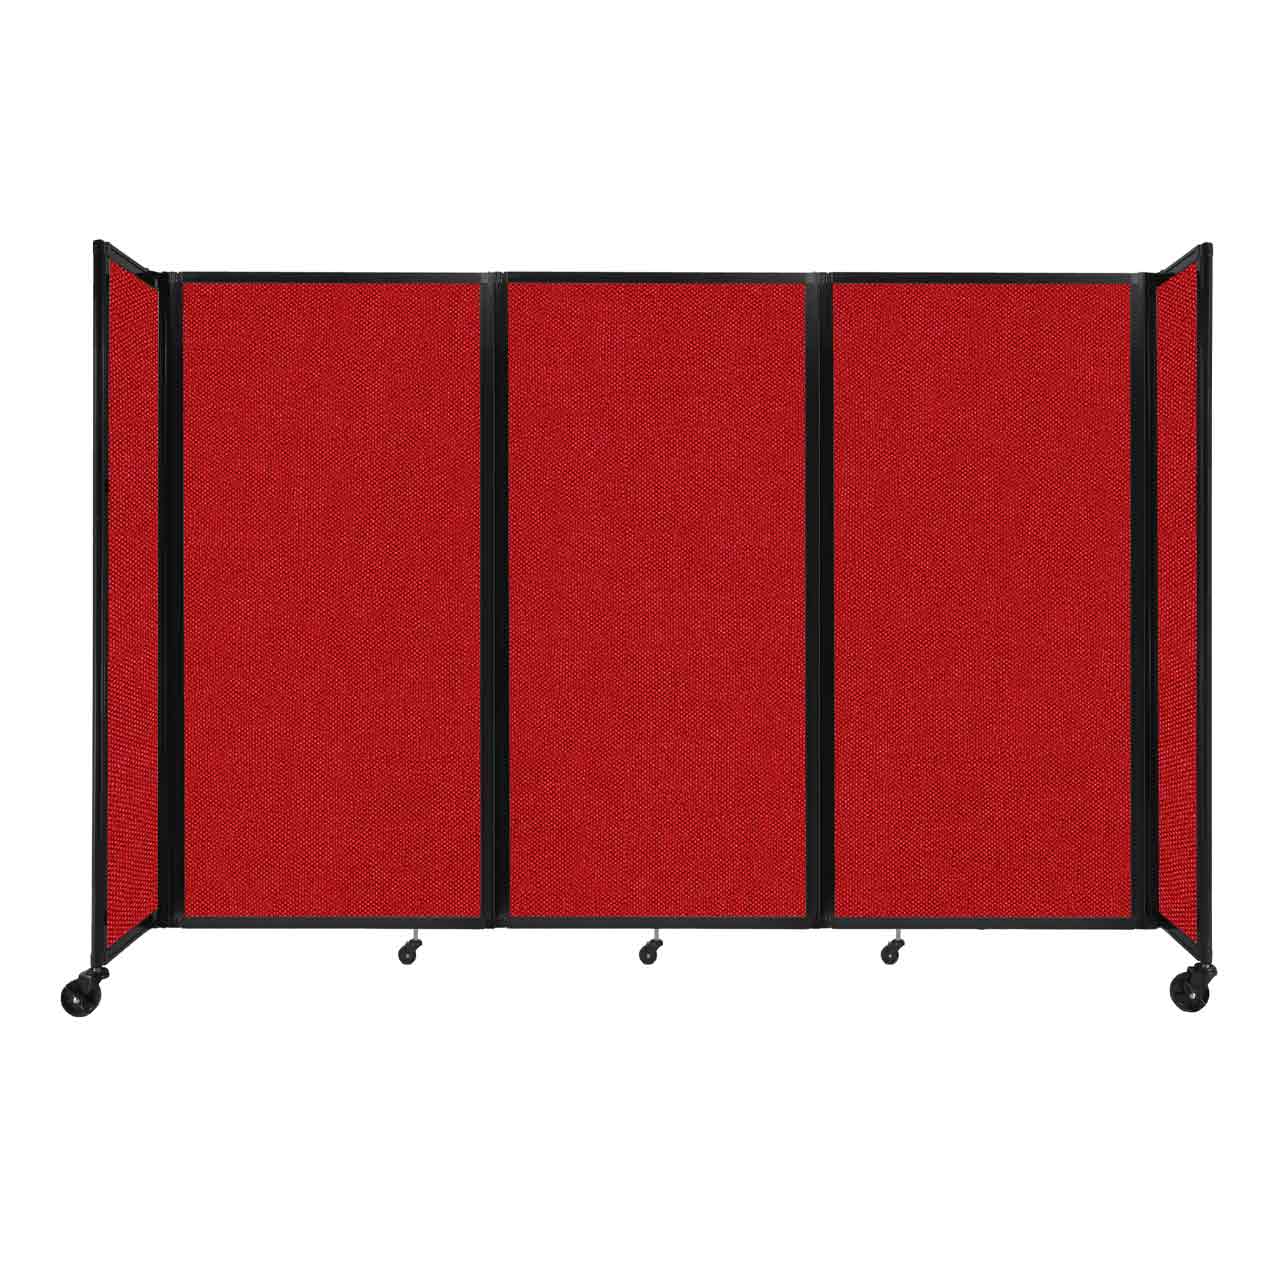 Room Divider 360° Folding Portable Partition with Acoustical Fabric Panels, 8' 6" W x 6' H